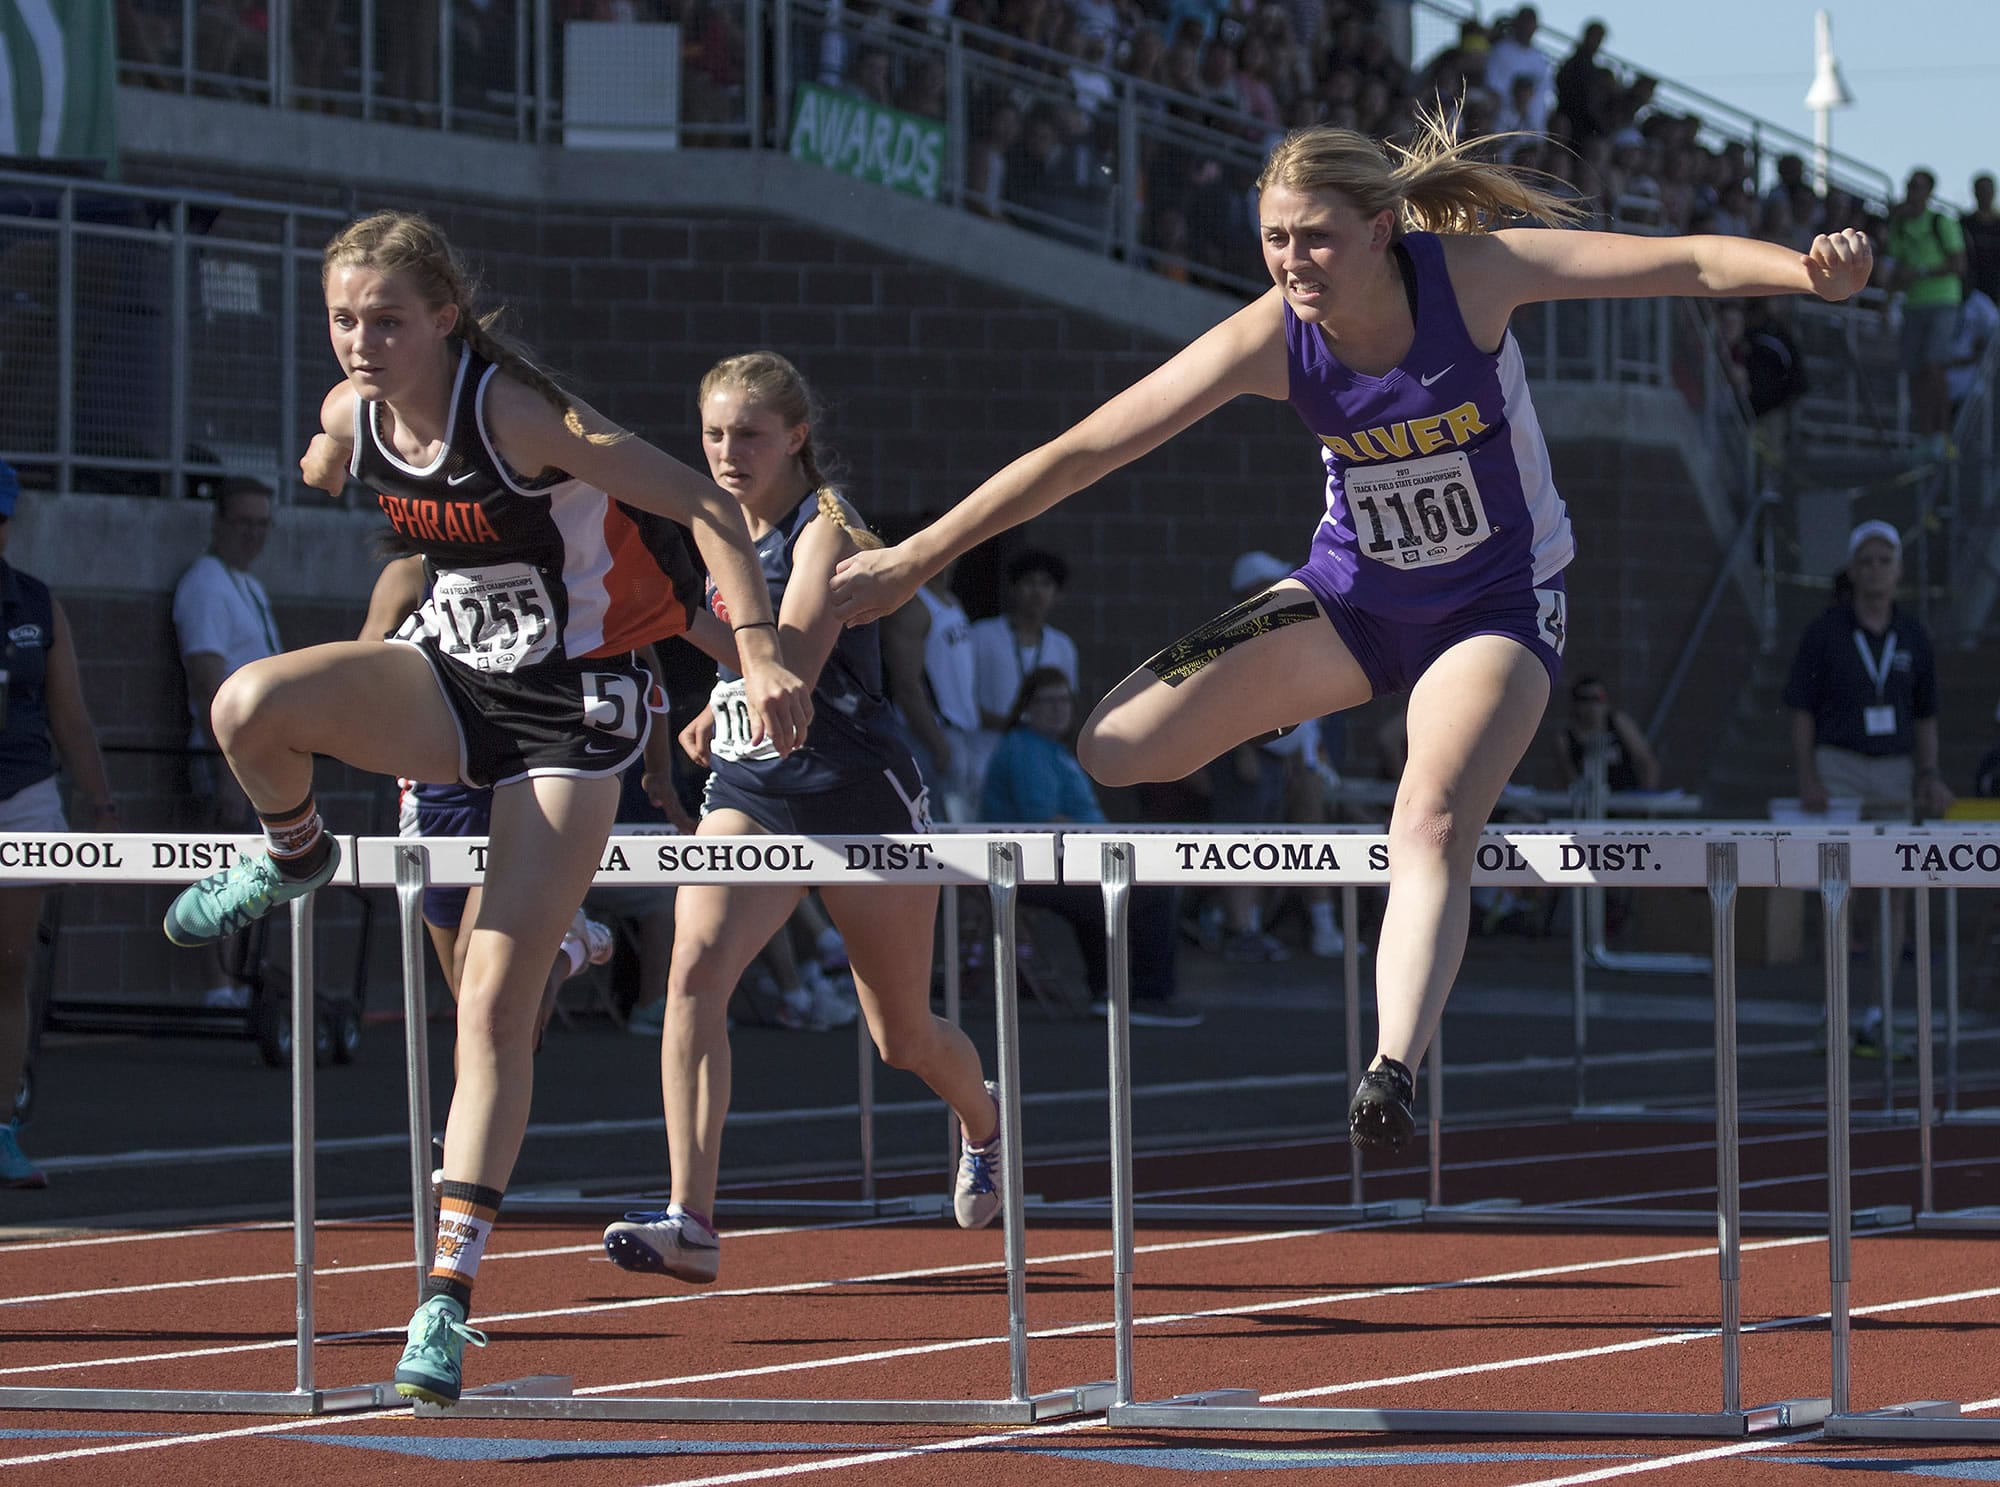 Columbia River's Ellie Walker, right, battles with Ephrata's McCall DeChenne, left, as they clear the final hurdle in the 2A Girls 100 Meter Hurdles event at the WA State Track and Field Meet Friday, May 26, 2017, in Tacoma, Wash. Walker had to settle for 2nd place finishing behind DeChenne.